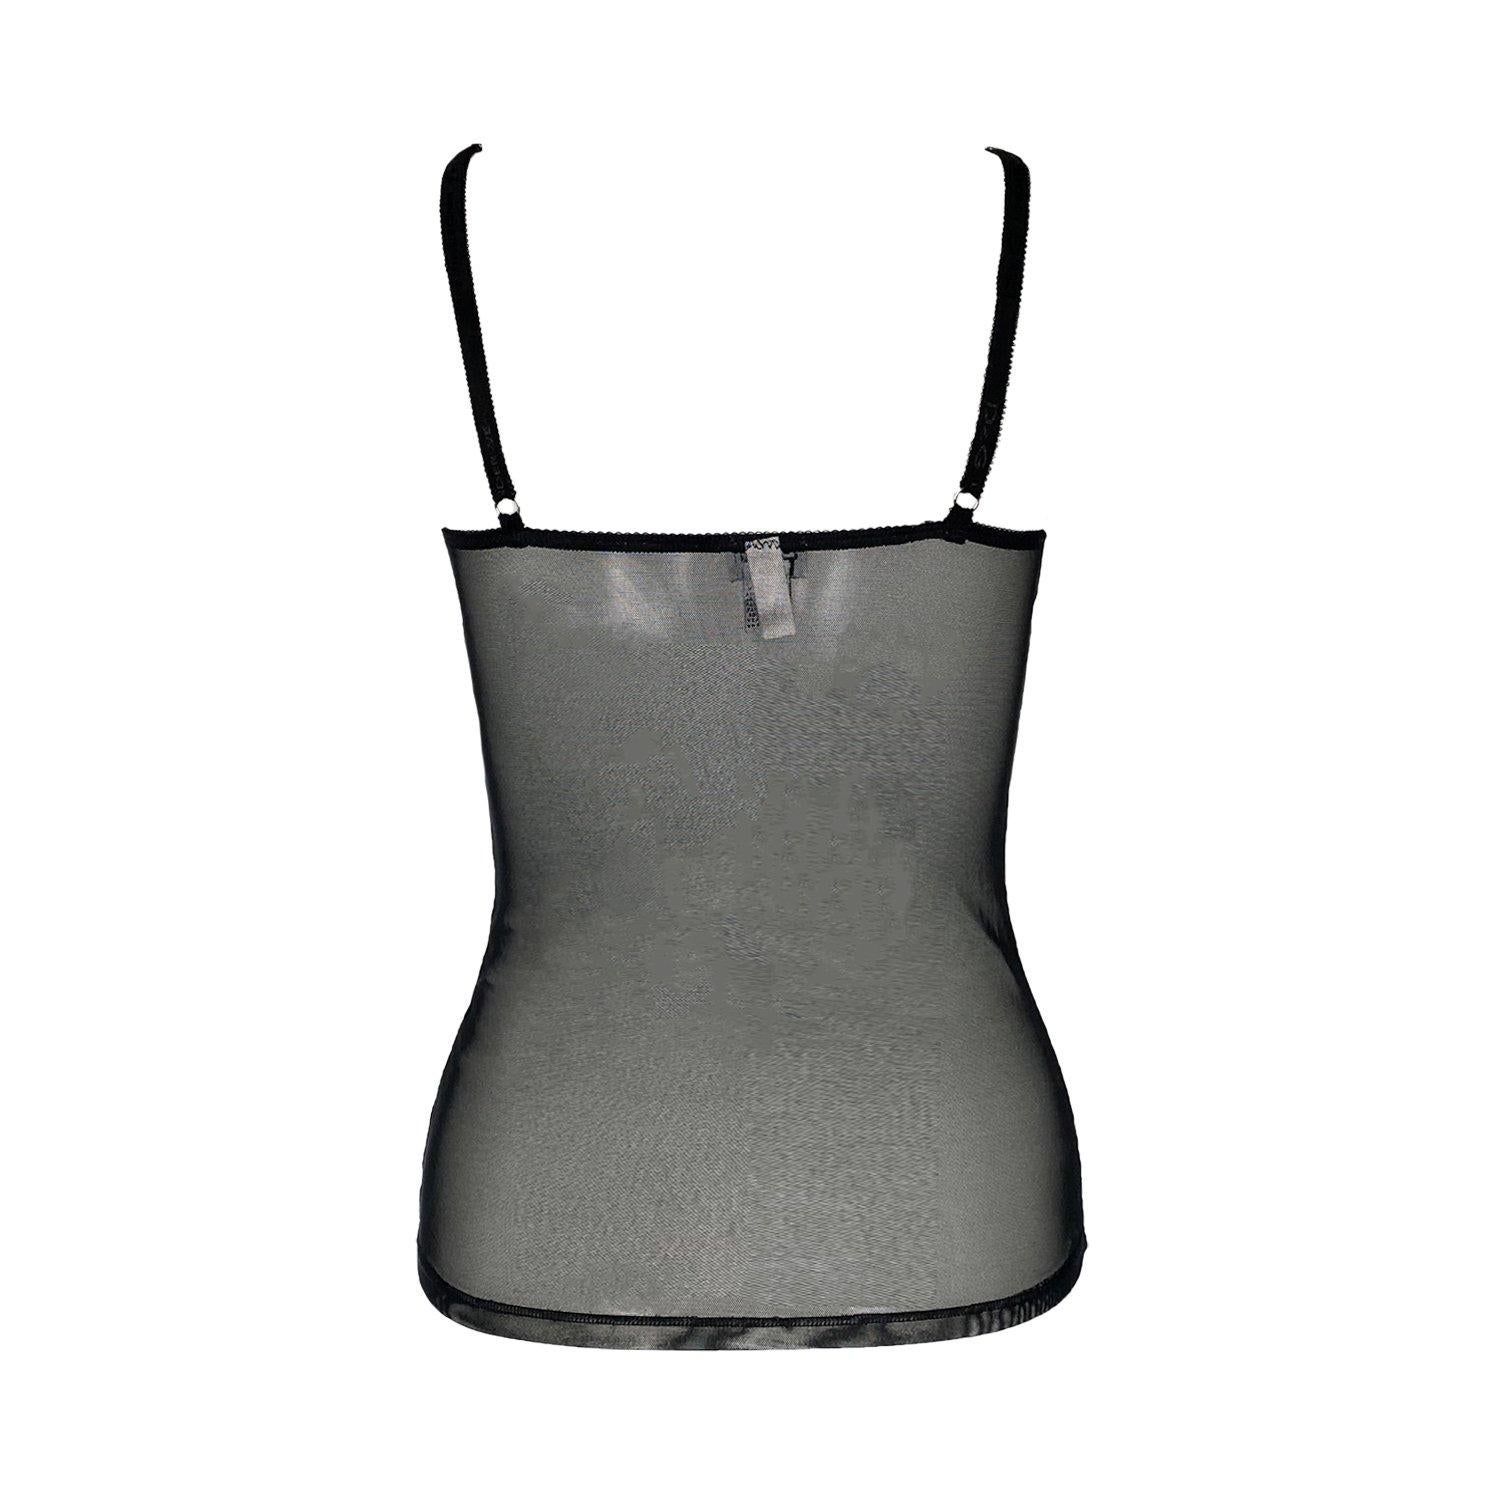 Iconic vintage black D&G by Dolce and Gabbana sheer lace cami from the early 2000s in a y2k lingerie style. Featuring lace detailing in a silver glitter shine to the bustier and cups. D&G italic signature metal logo in silver charm to the cup strap.